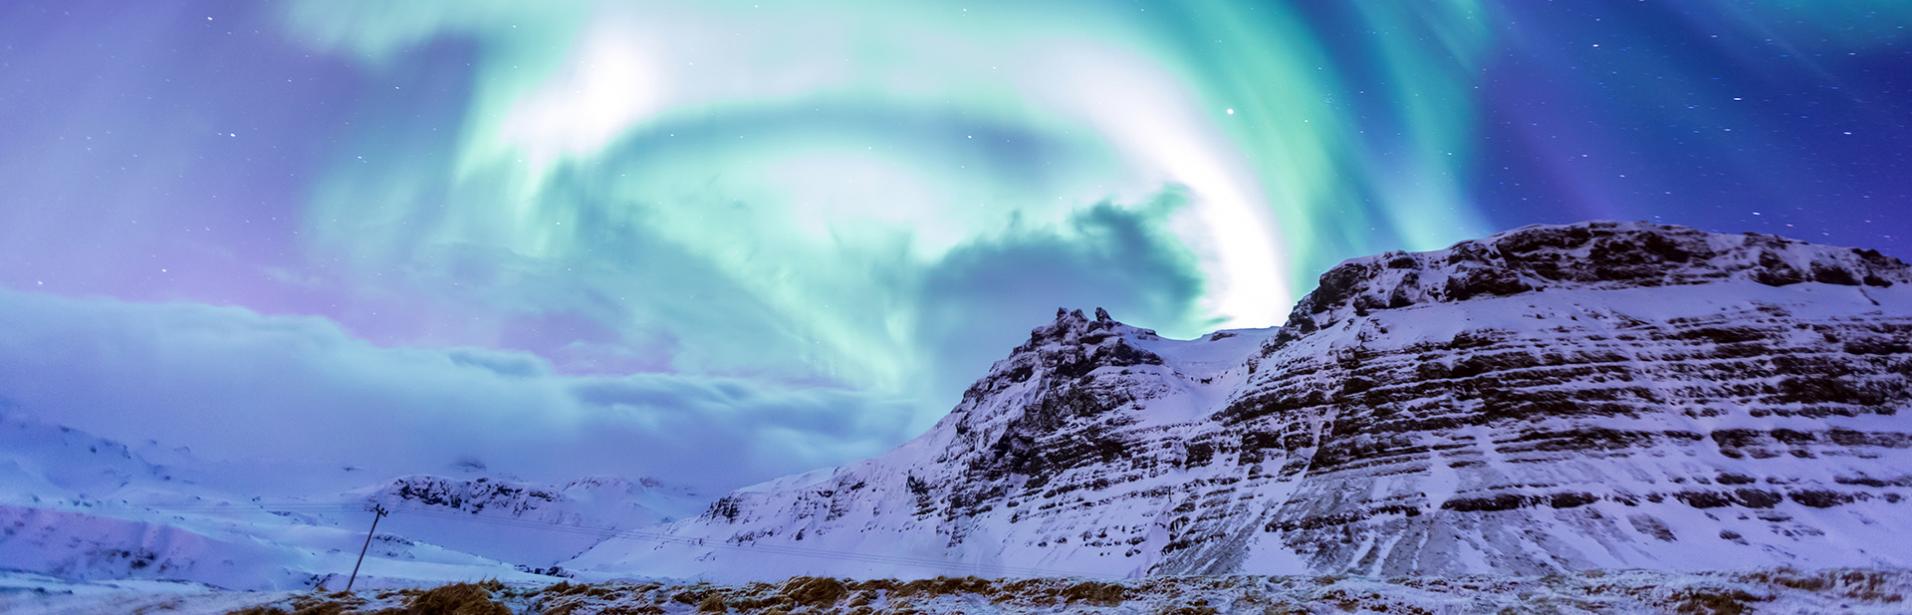 Iceland holidays northern lights tour package: northern lights in a snowy mountain terrain.